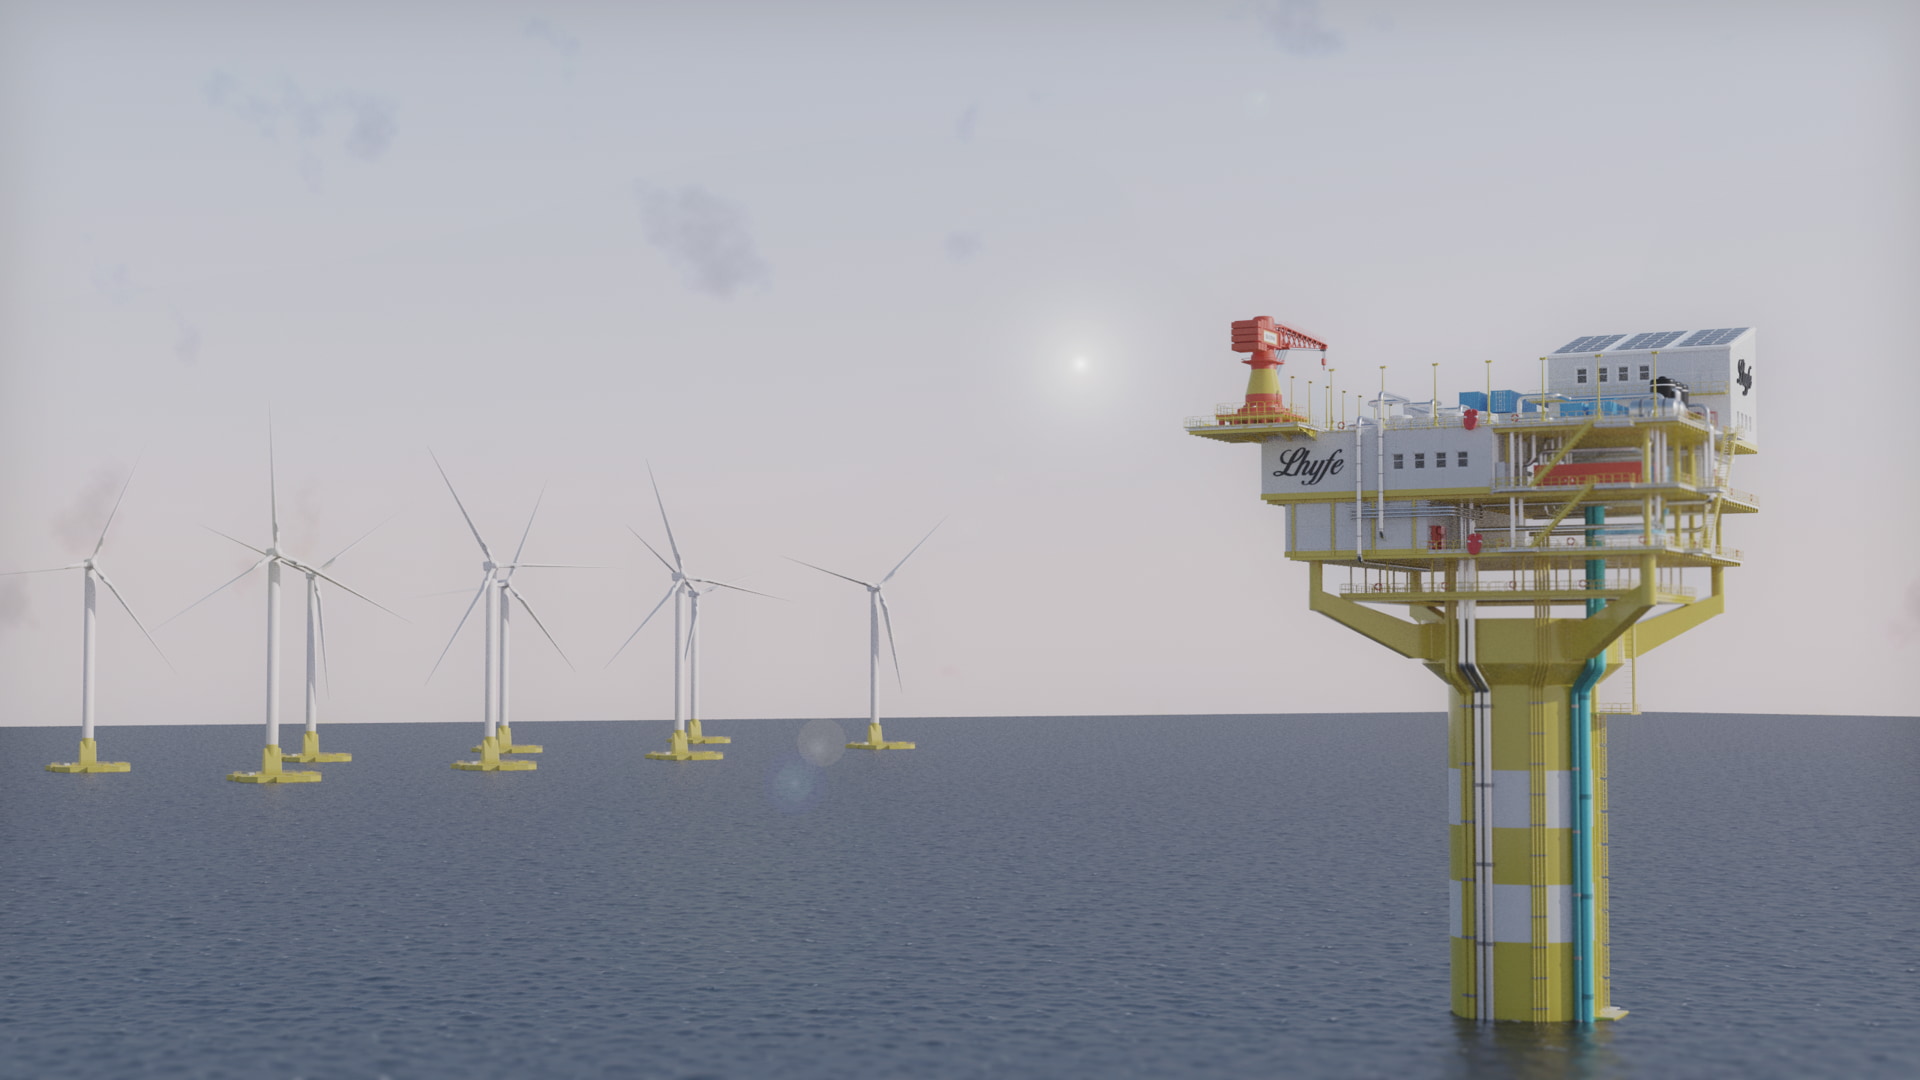 A photo render of a Lhyfe green hydrogen production platform at an offshore wind farm